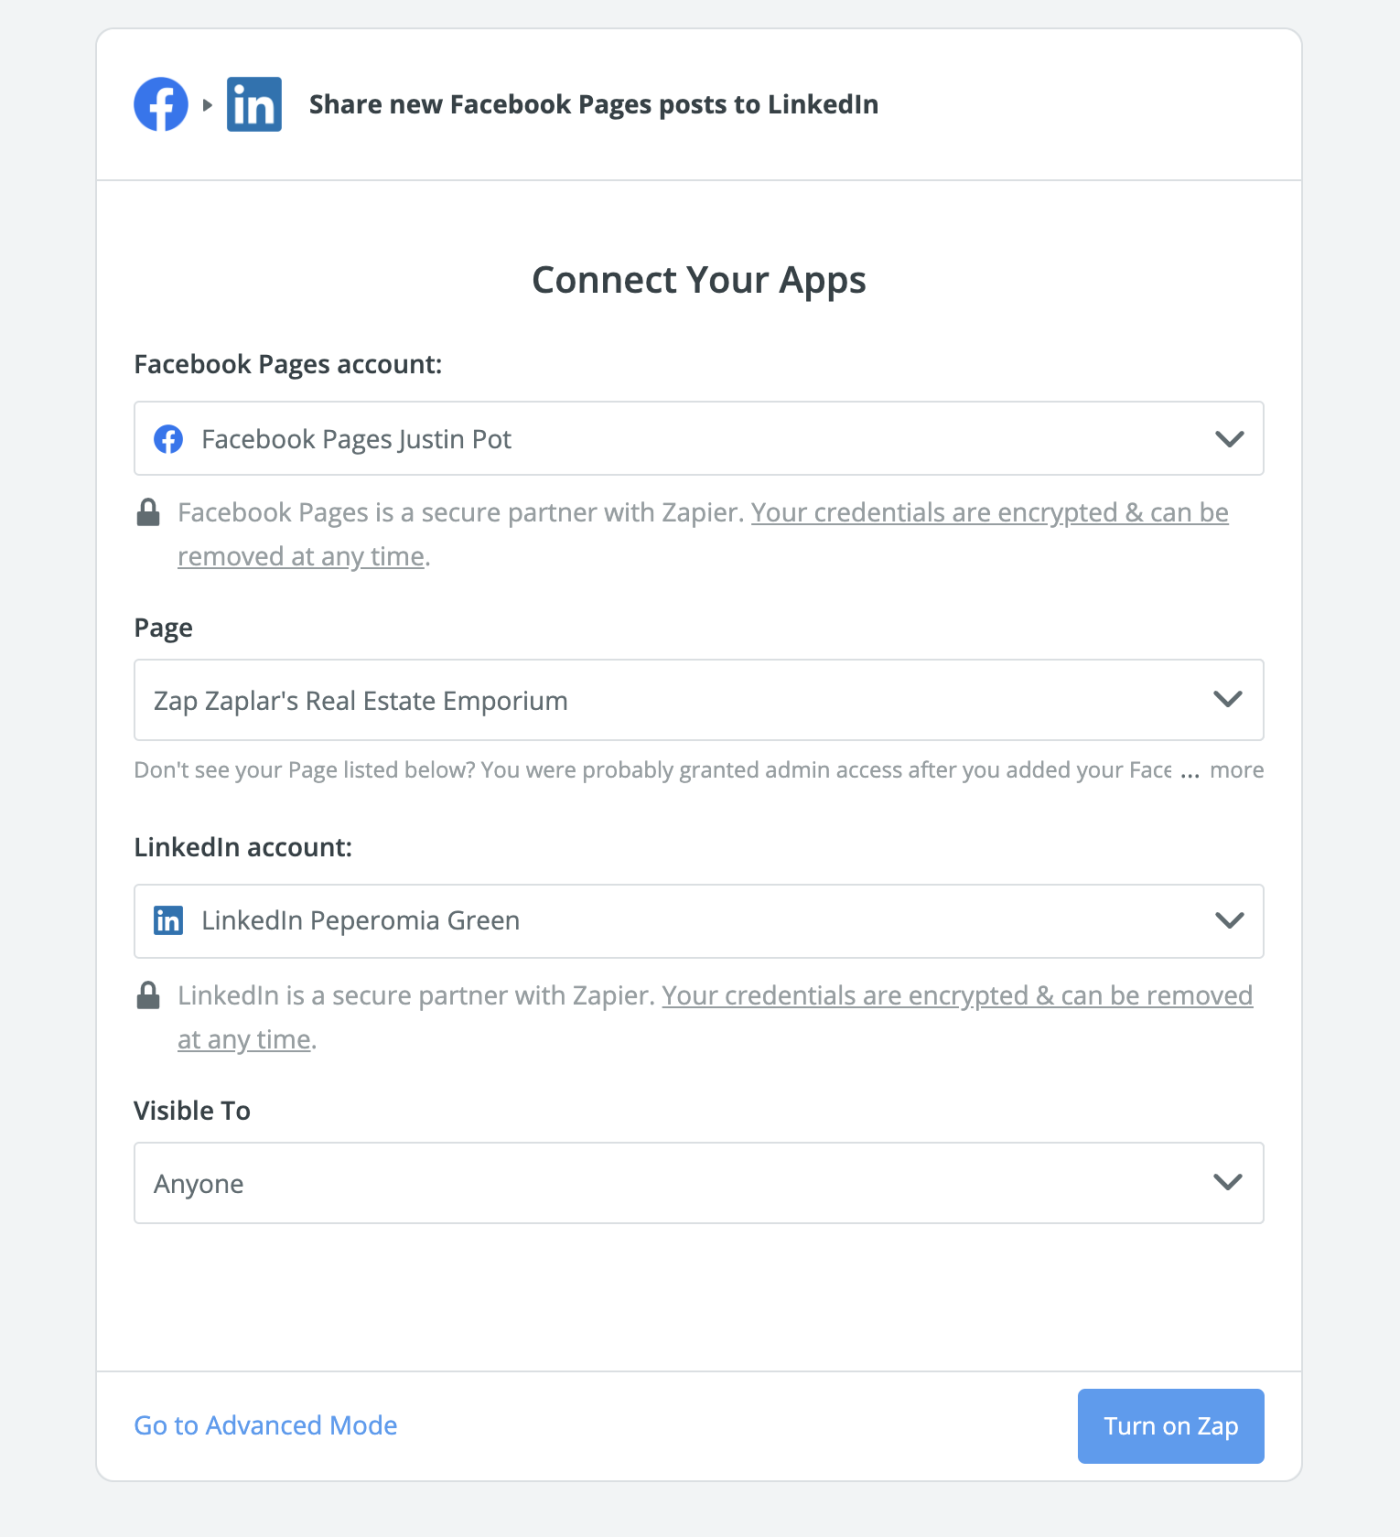 Connect Facebook Pages to LinkedIn using Zapier